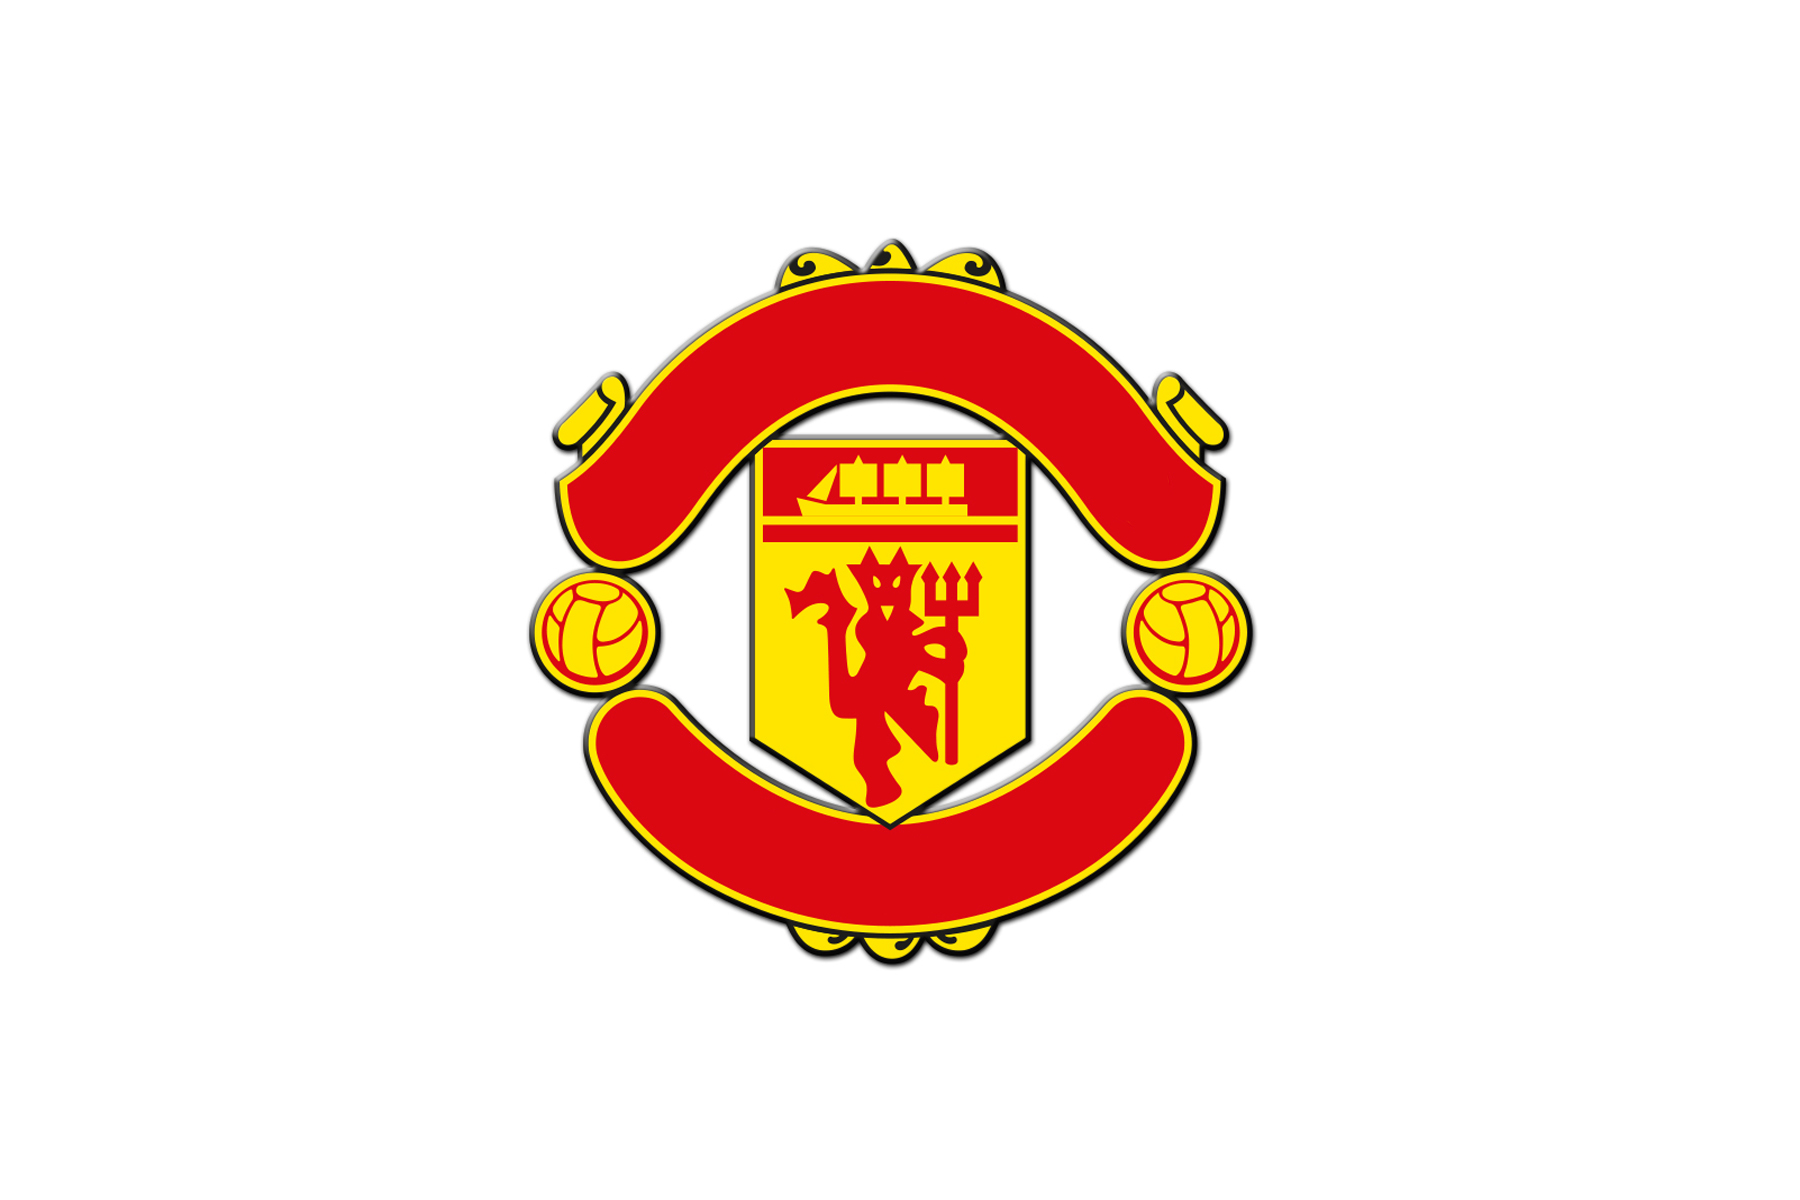 The Red Devils